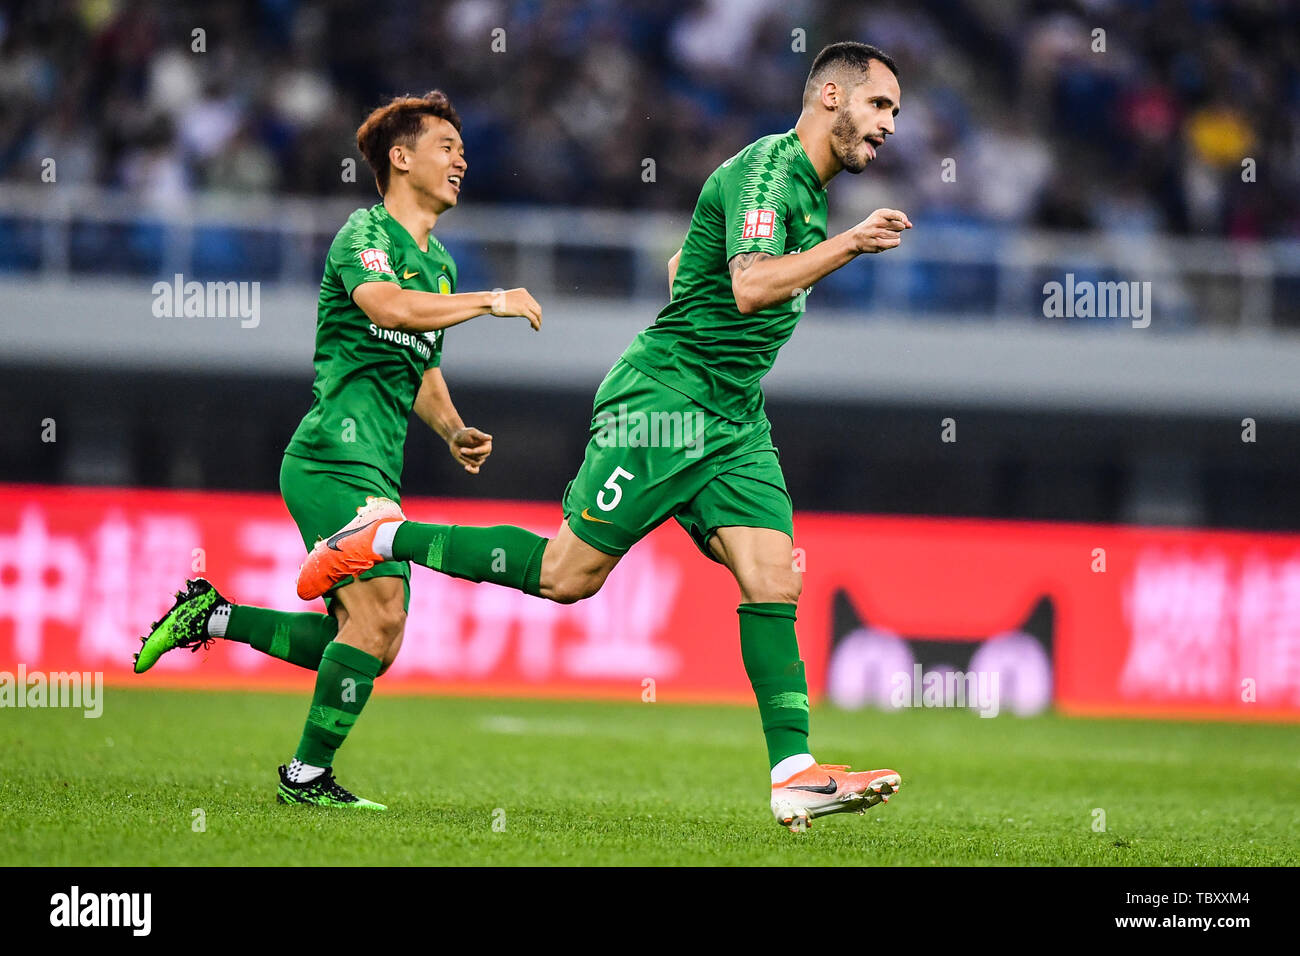 Brazilian football player Renato Soares de Oliveira Augusto, or simply Renato Augusto, of Beijing Sinobo Guoan celebrates after scoring against Tianjin TEDA in their 12th round match during the 2019 Chinese Football Association Super League (CSL) in Tianjin, China, 2 June 2019.  Beijing Sinobo Guoan defeated Tianjin TEDA 2-1. Stock Photo